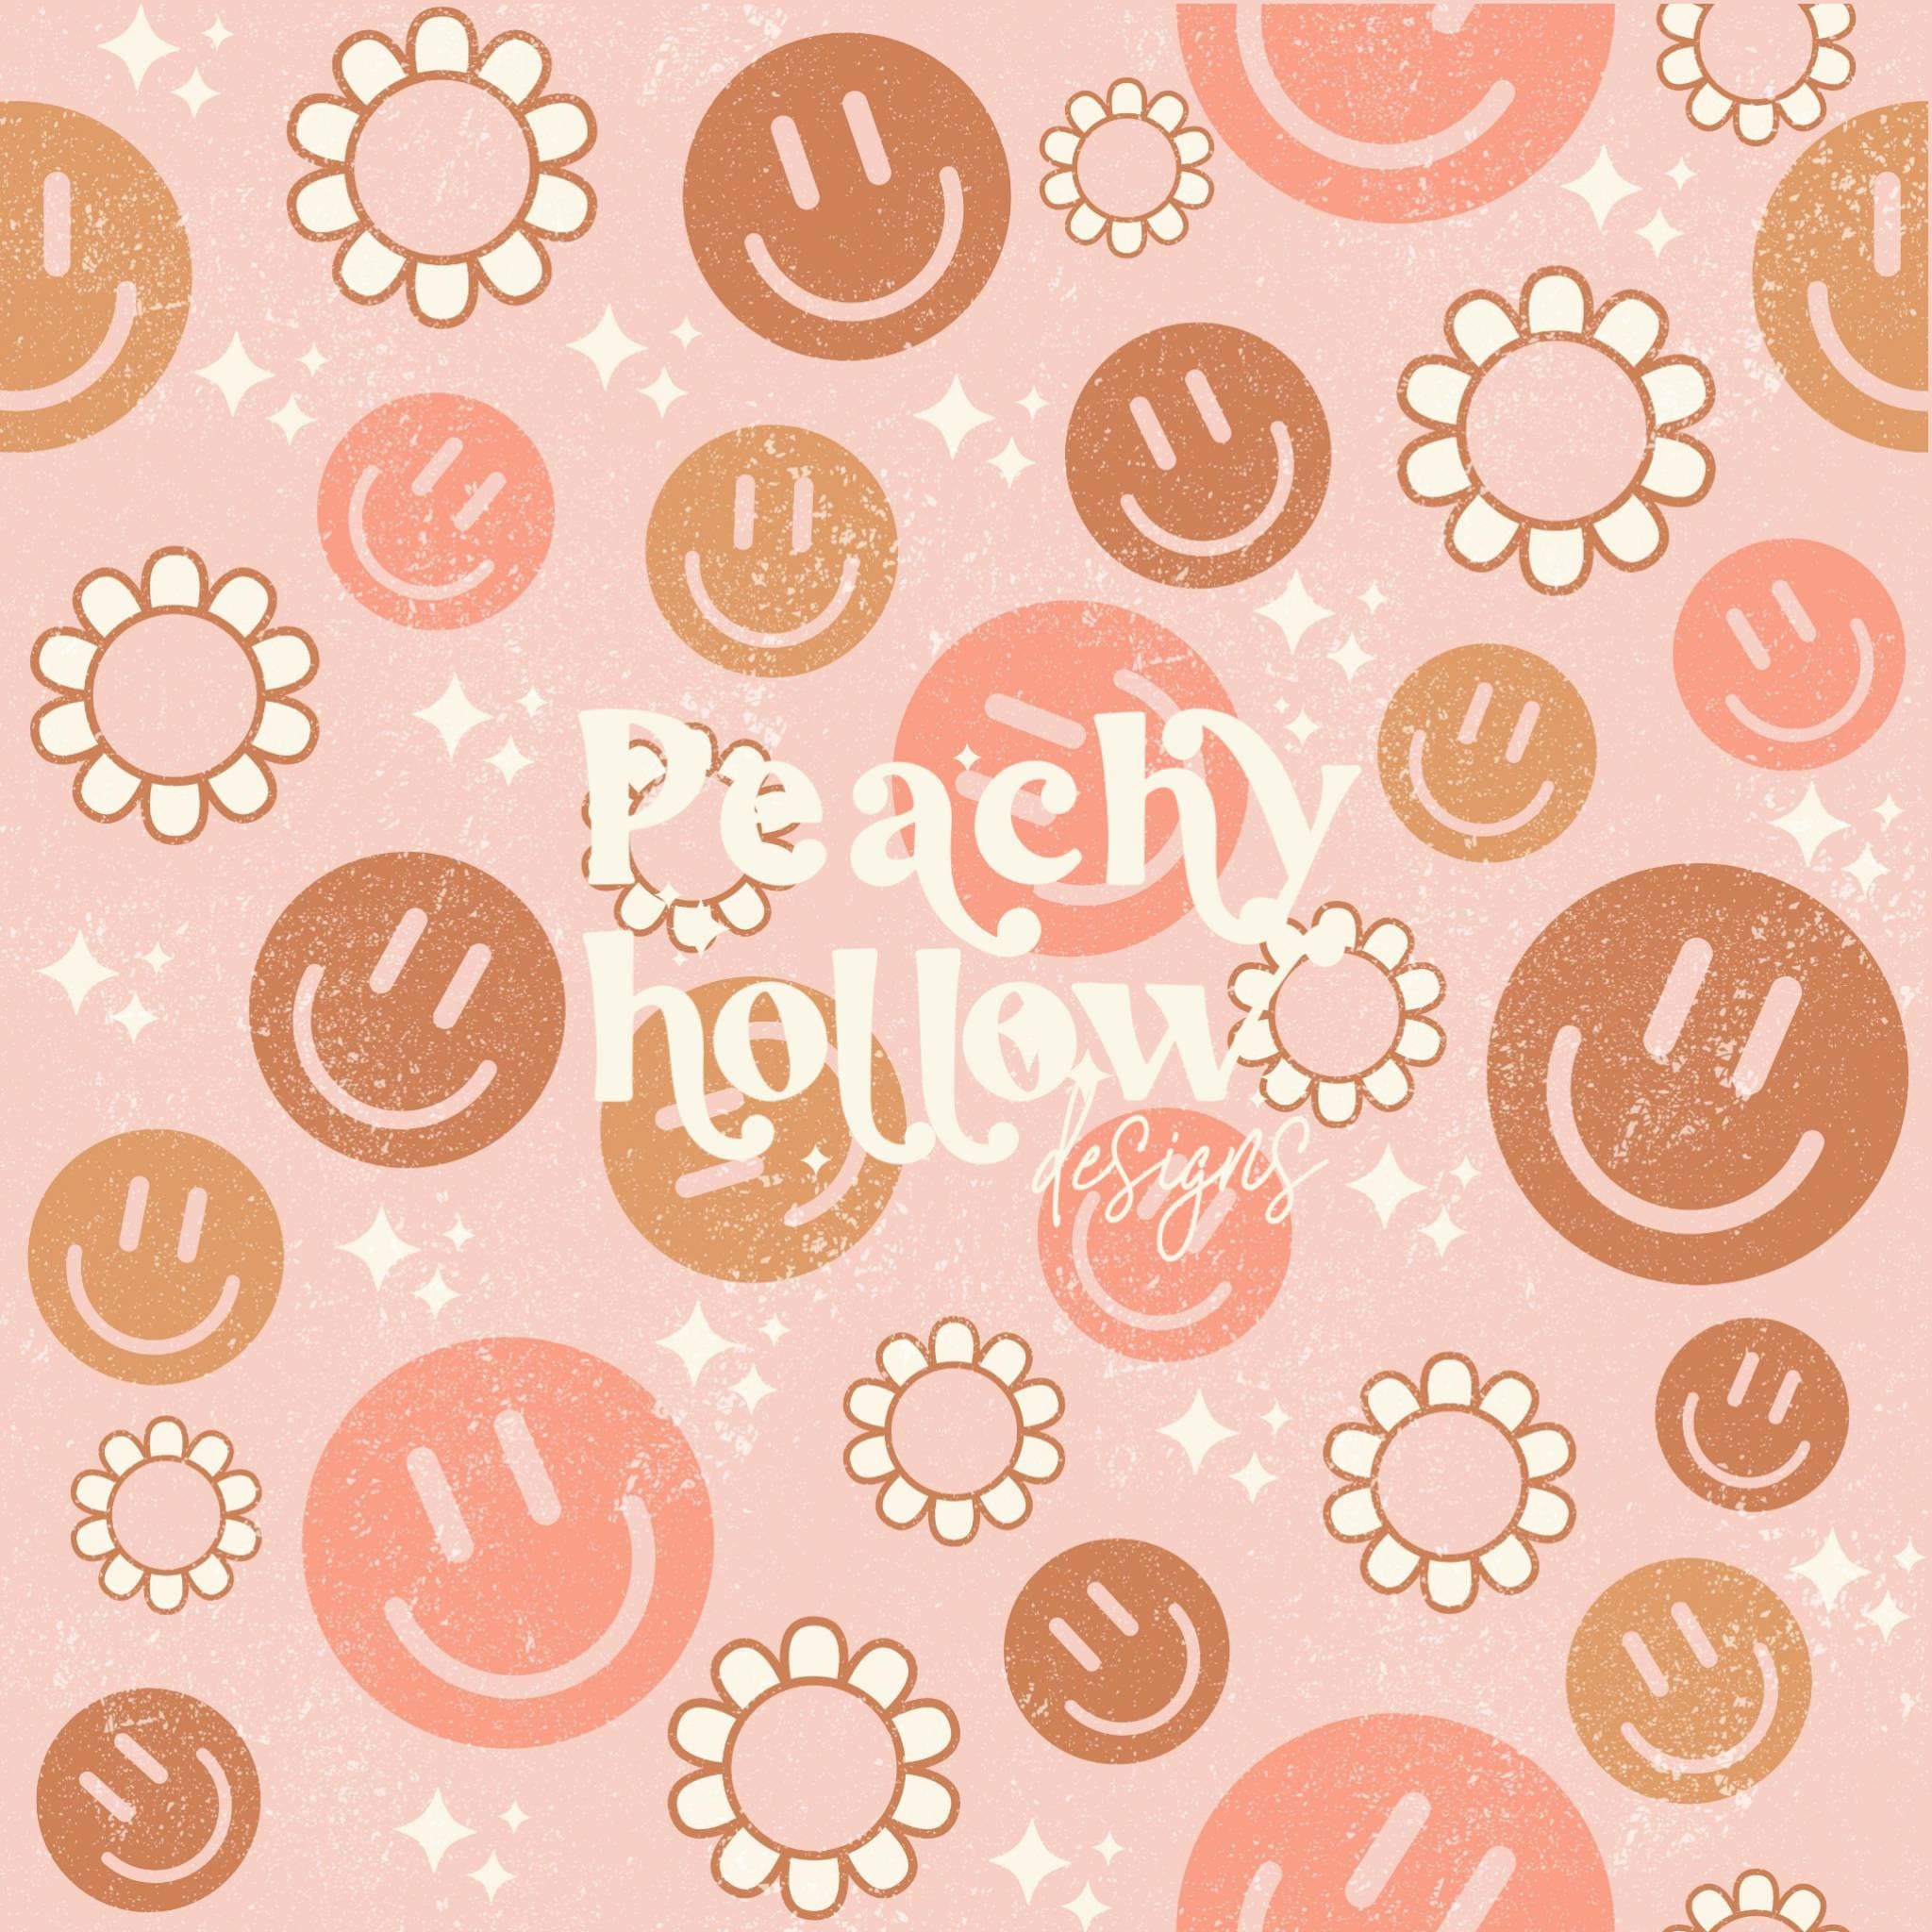 Smiley Face Seamless Pattern Background Paper Scrapbook